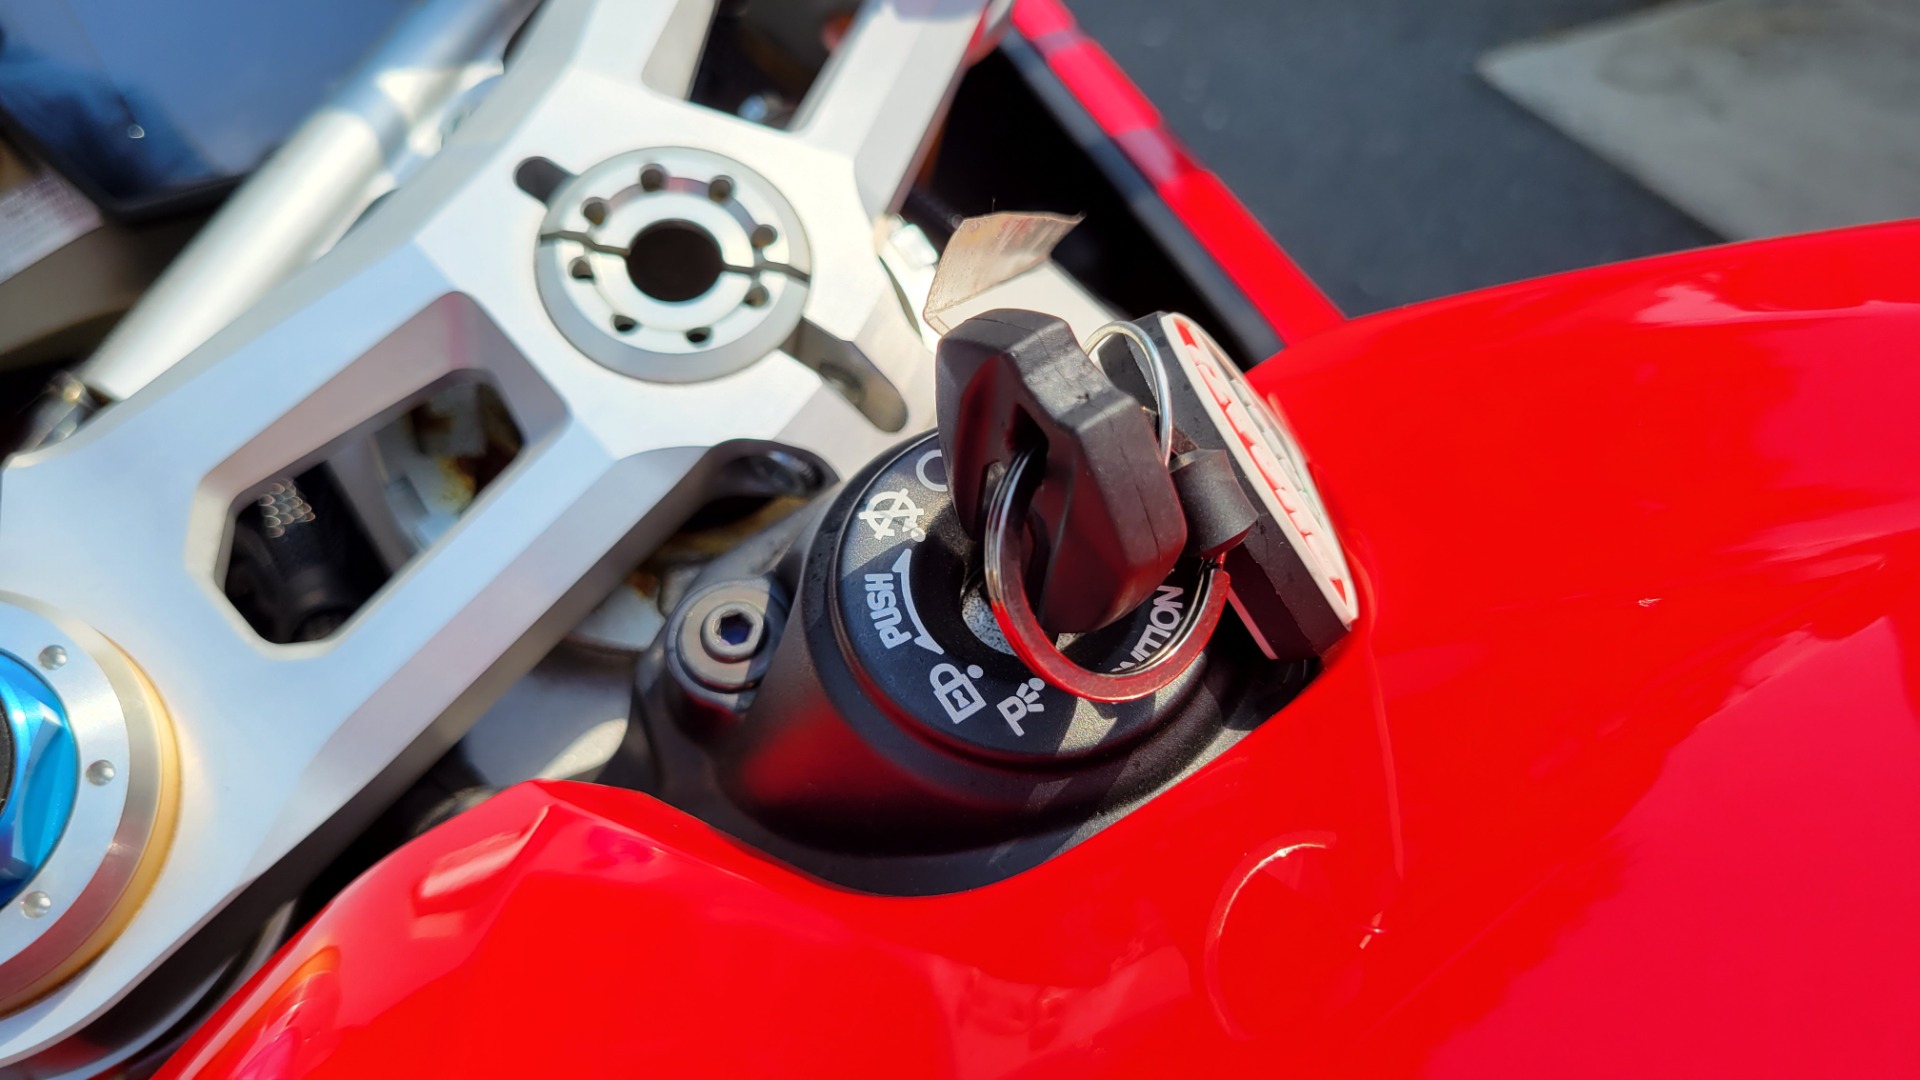 Used 2018 Ducati PANIGALE V4S / 1103CC 214HP / FUEL INJECTED / LOW MILES for sale $24,500 at Formula Imports in Charlotte NC 28227 22